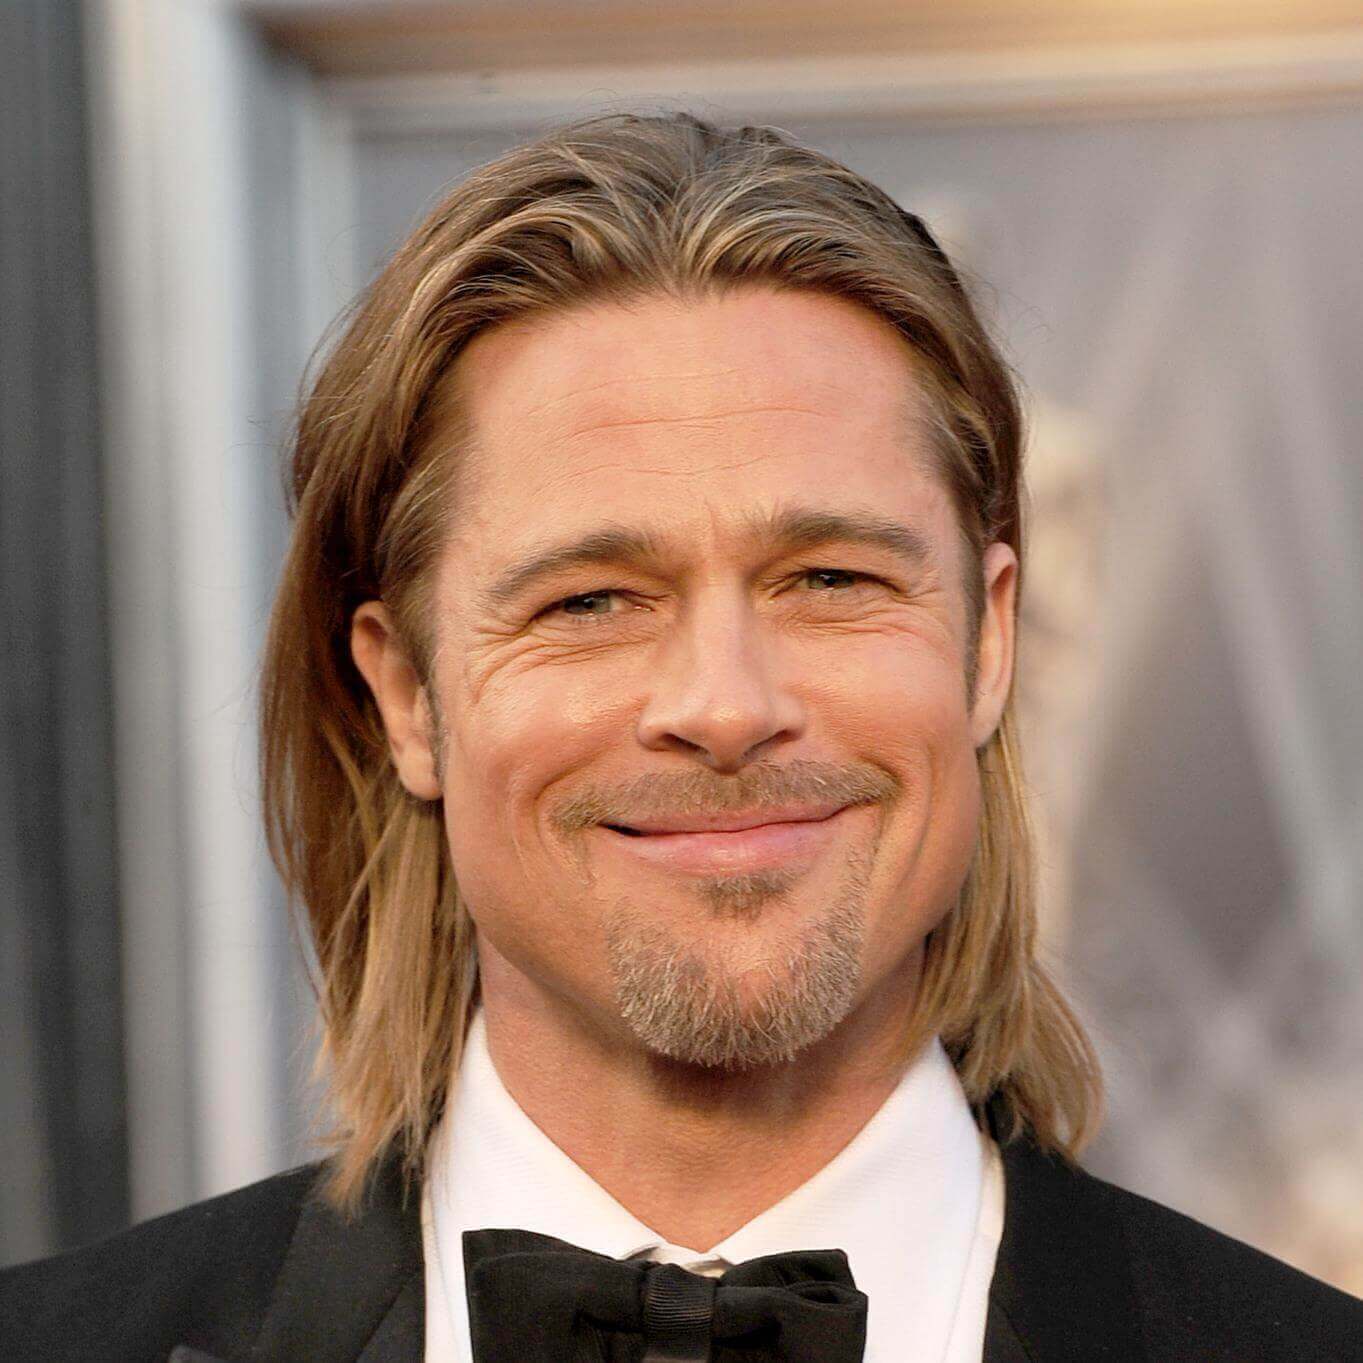 Brad Pitt Biography • American Actor and Producer